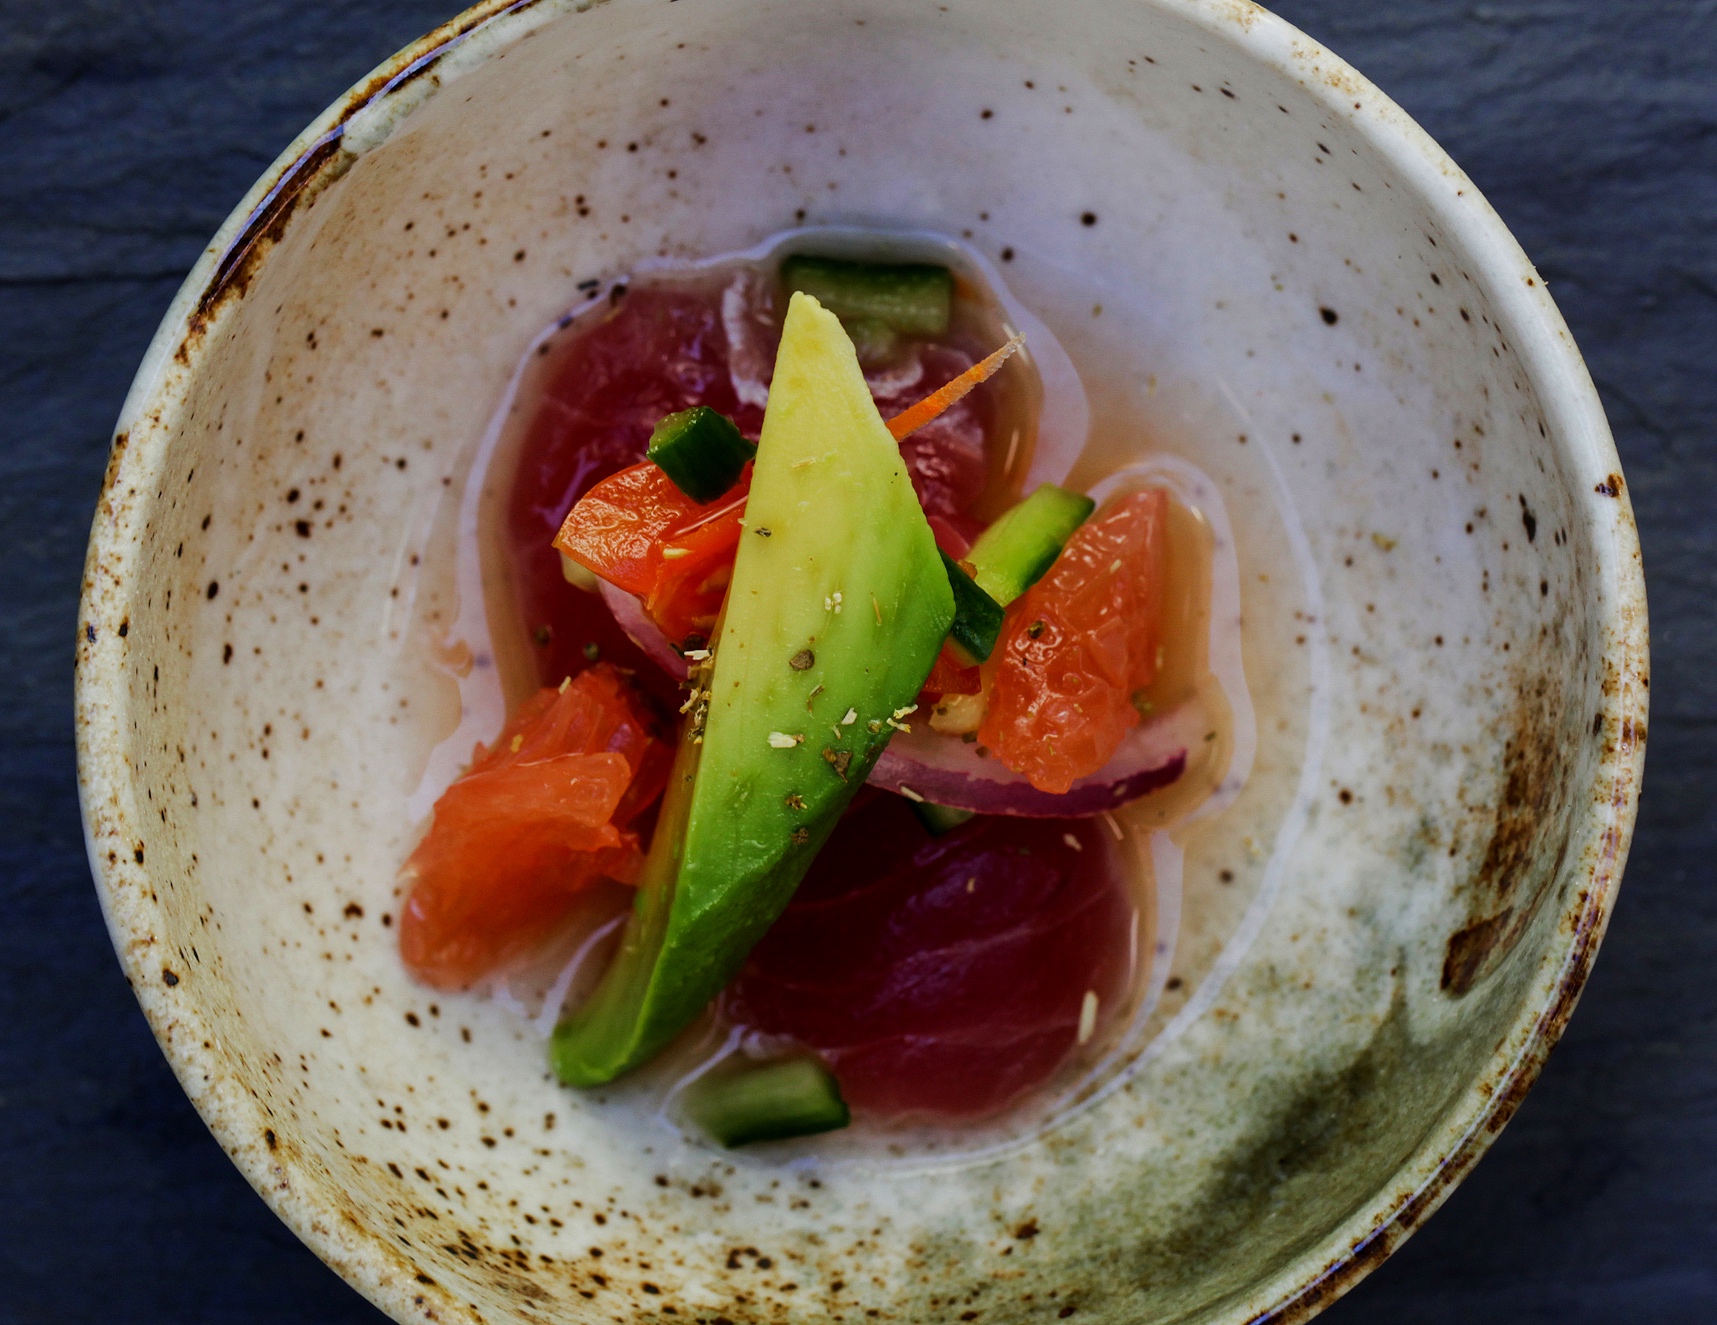 Ahi tuna ceviche with grapefruit, cucumber, avocado and red onion